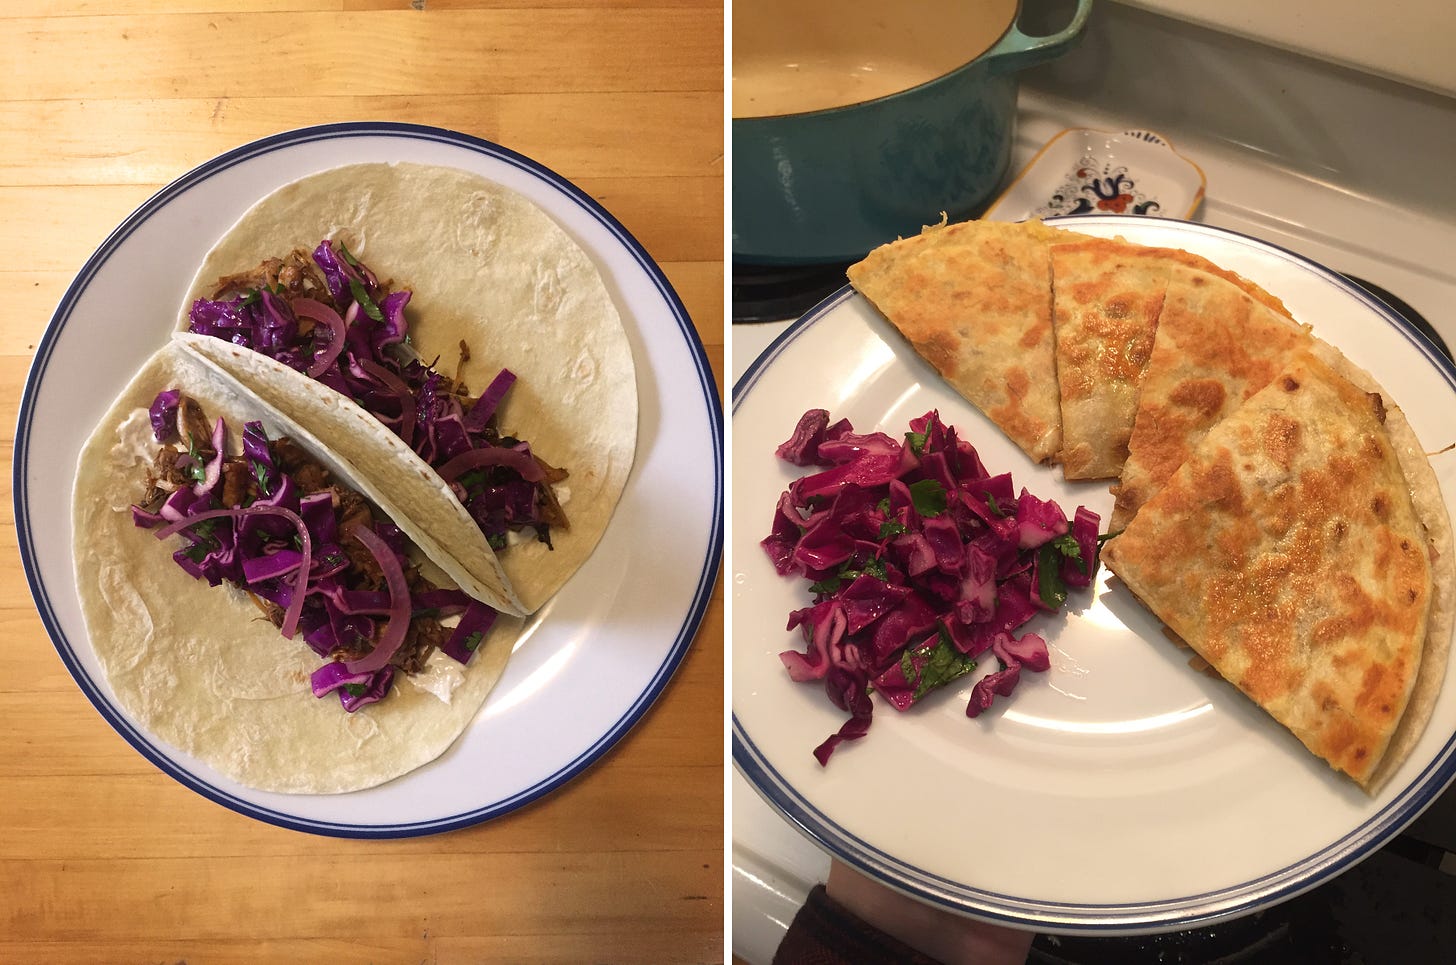 Left image: two jackfruit tacos with red cabbage slaw and pickled onions, on a white plate with a blue rim. Right image: In front of the stove, the same type of plate with four quarters of a pan-toasted quesadilla, and a little pile of the slaw next to them.